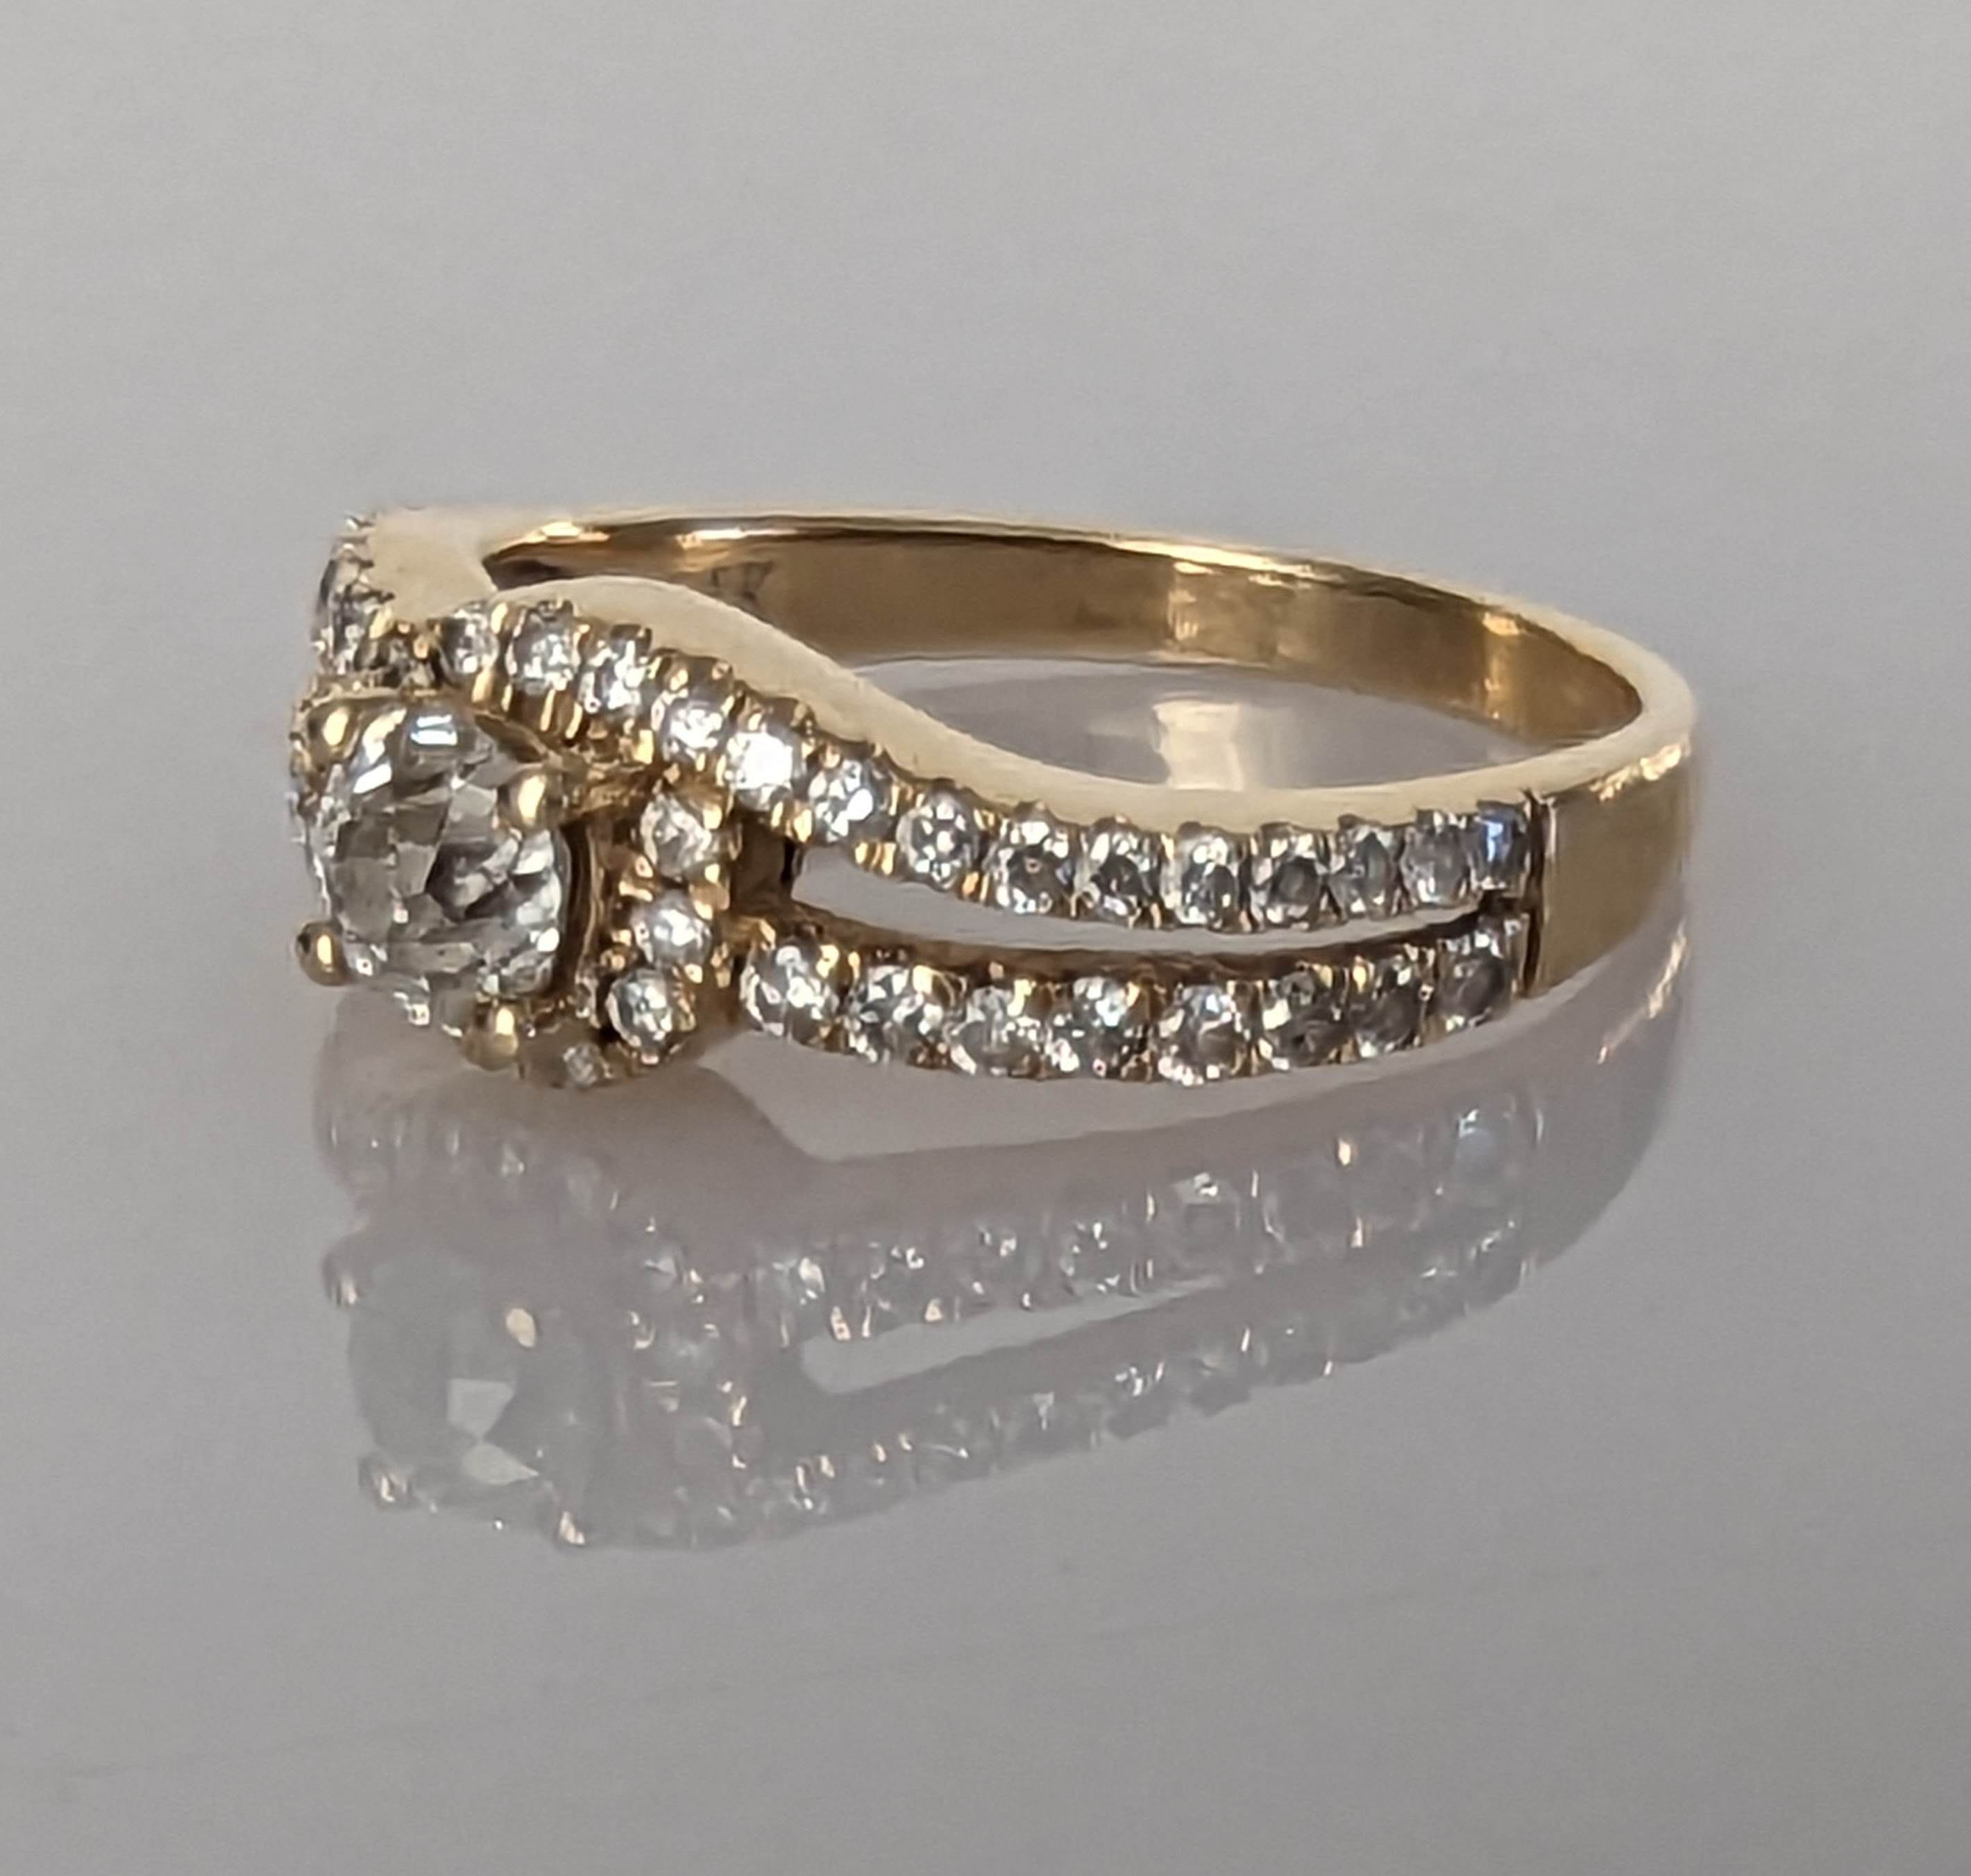 A solitaire diamond ring with split shoulder shank, decorated with diamonds to both sides - Image 2 of 8